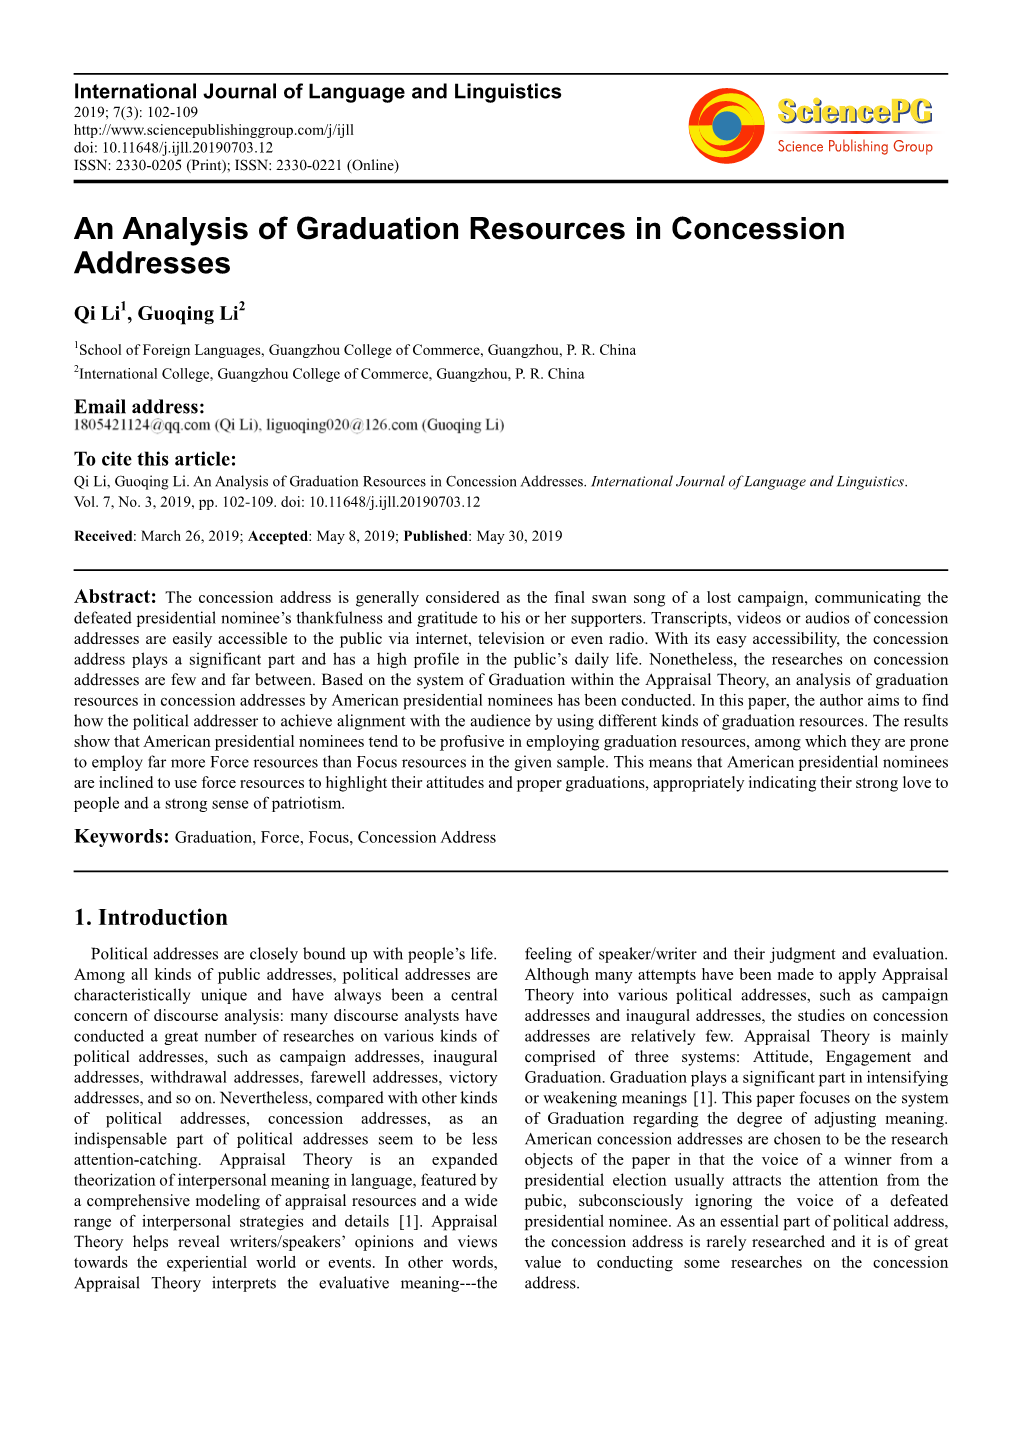 An Analysis of Graduation Resources in Concession Addresses